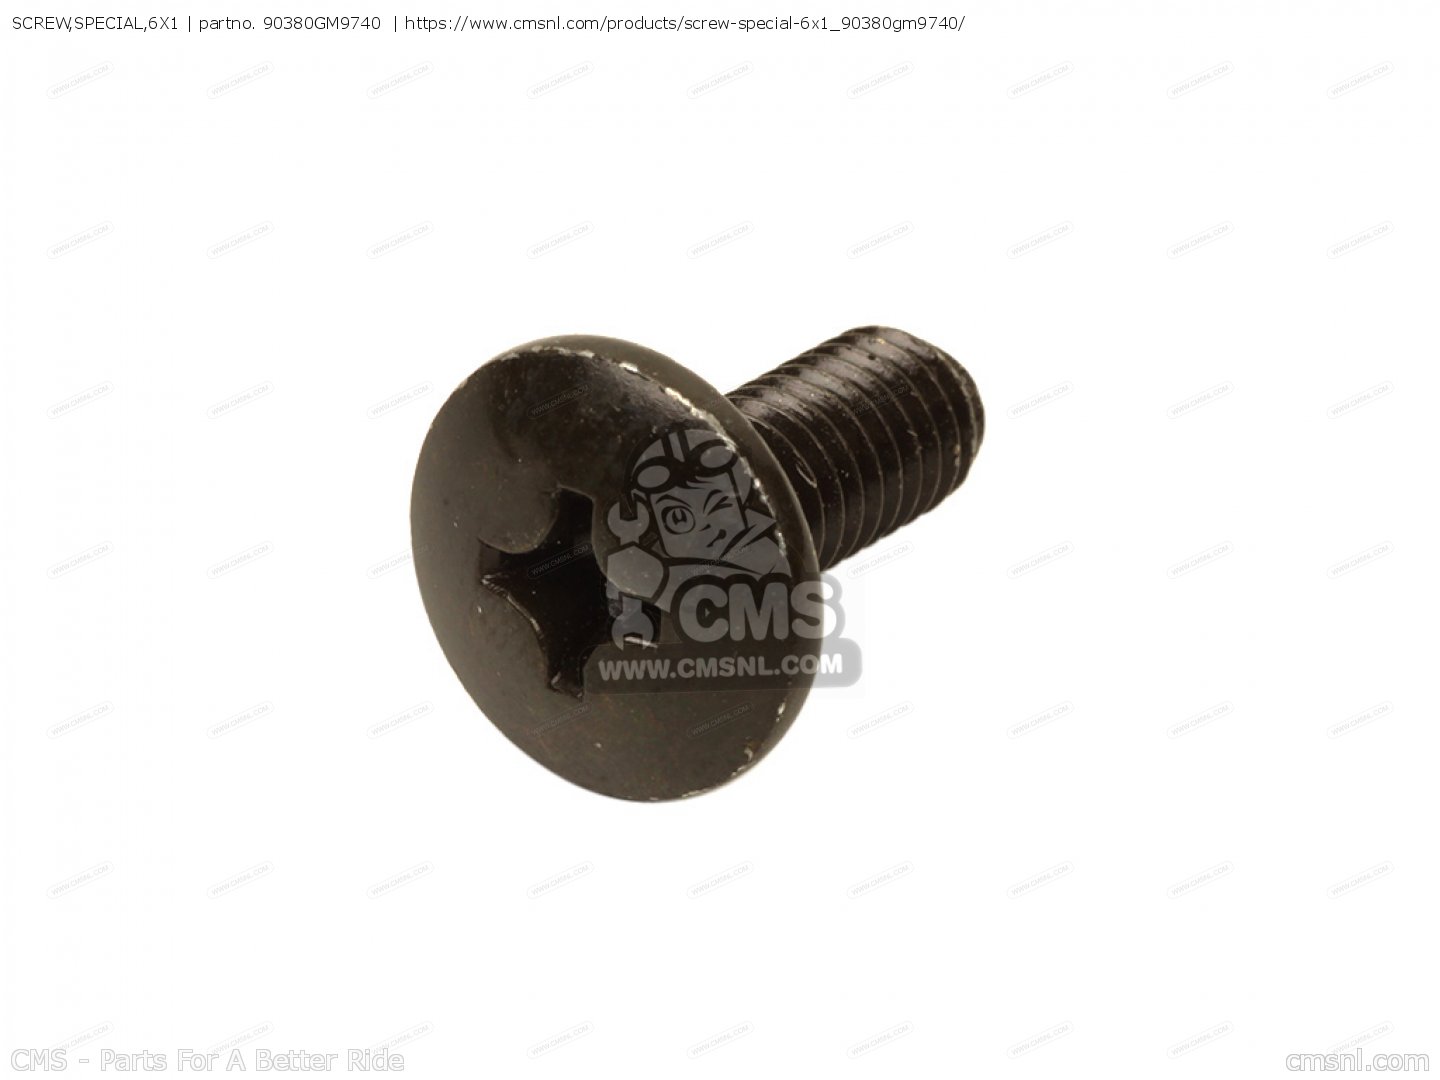 SCREW,SPECIAL,6X1 for ZN110R NICE - order at CMSNL